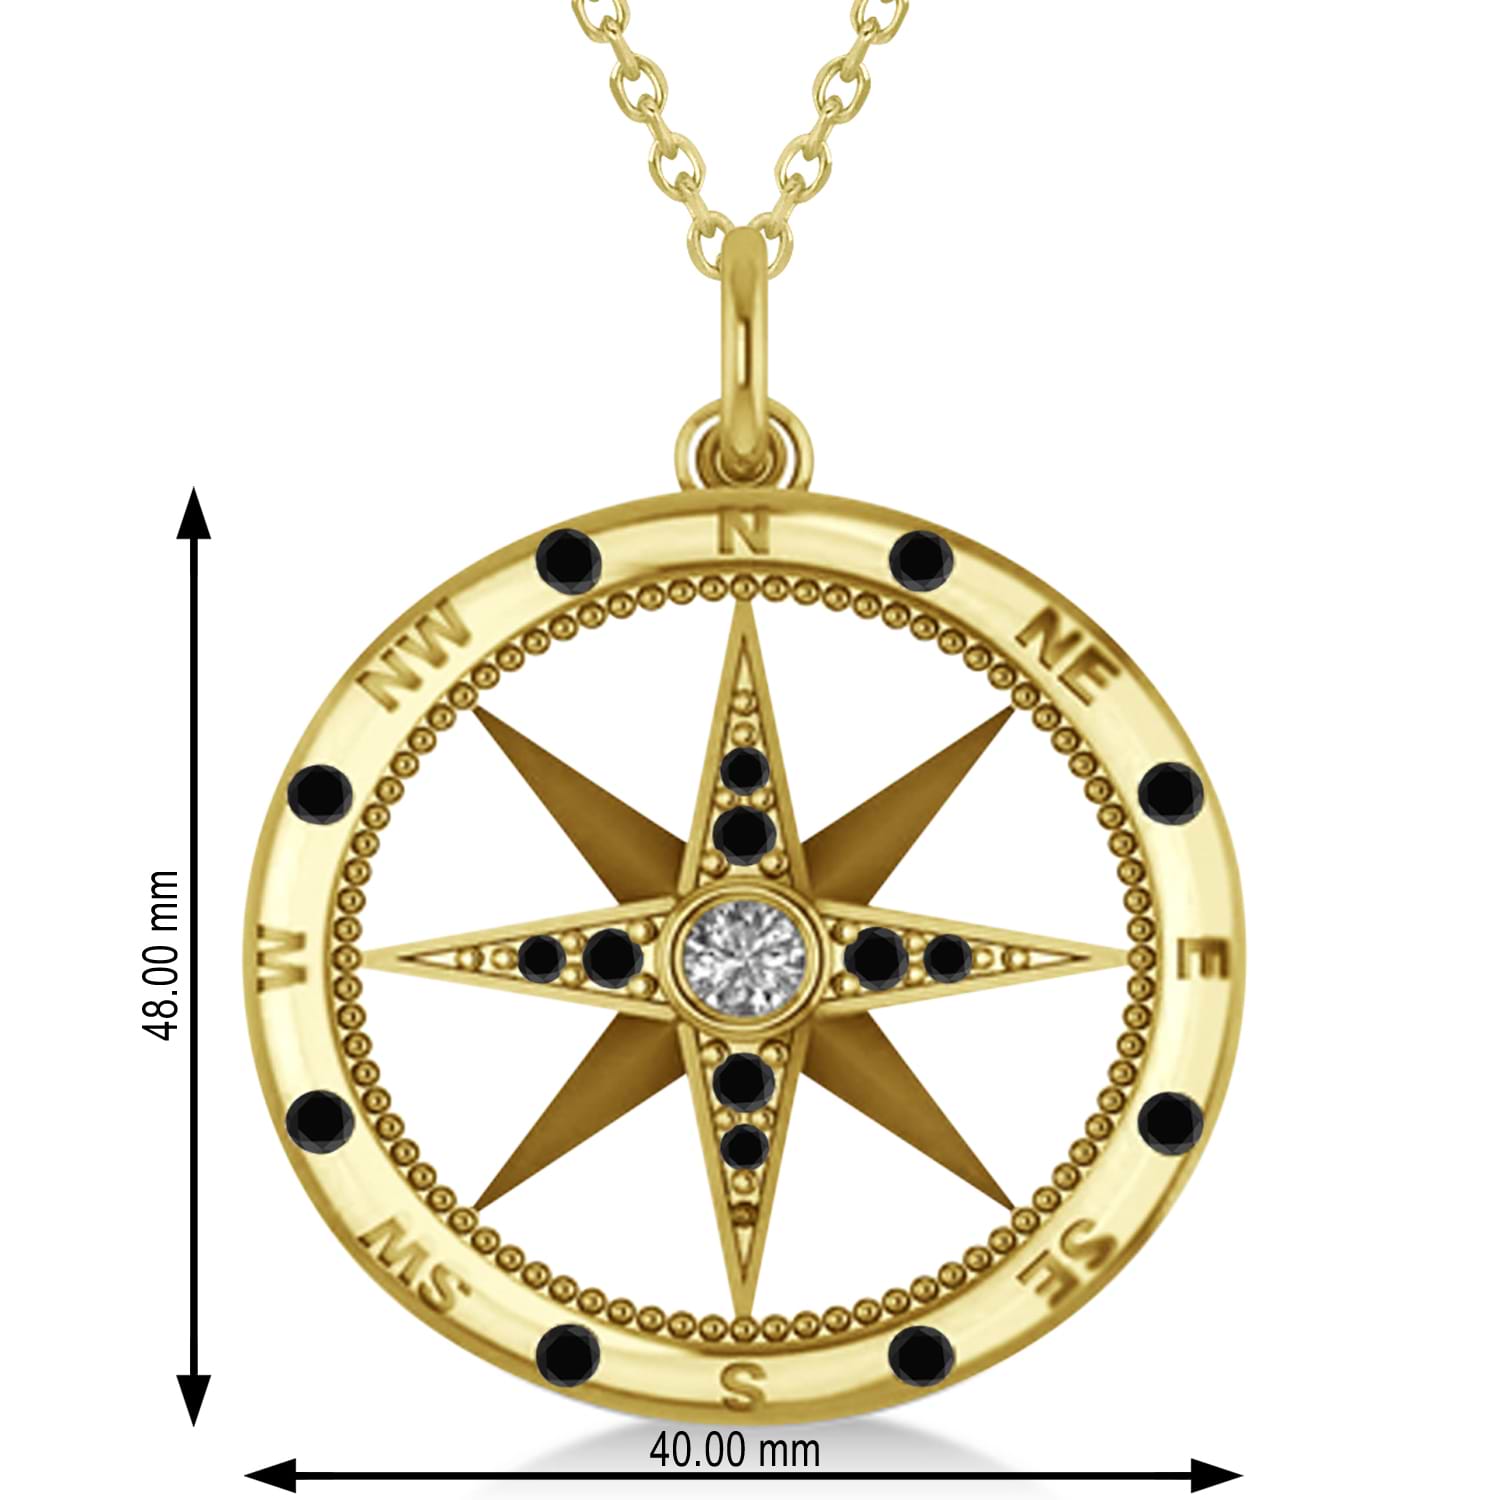 Extra Large Compass Pendant For Men Black & White Diamond Accented 14k Yellow Gold (0.45ct)